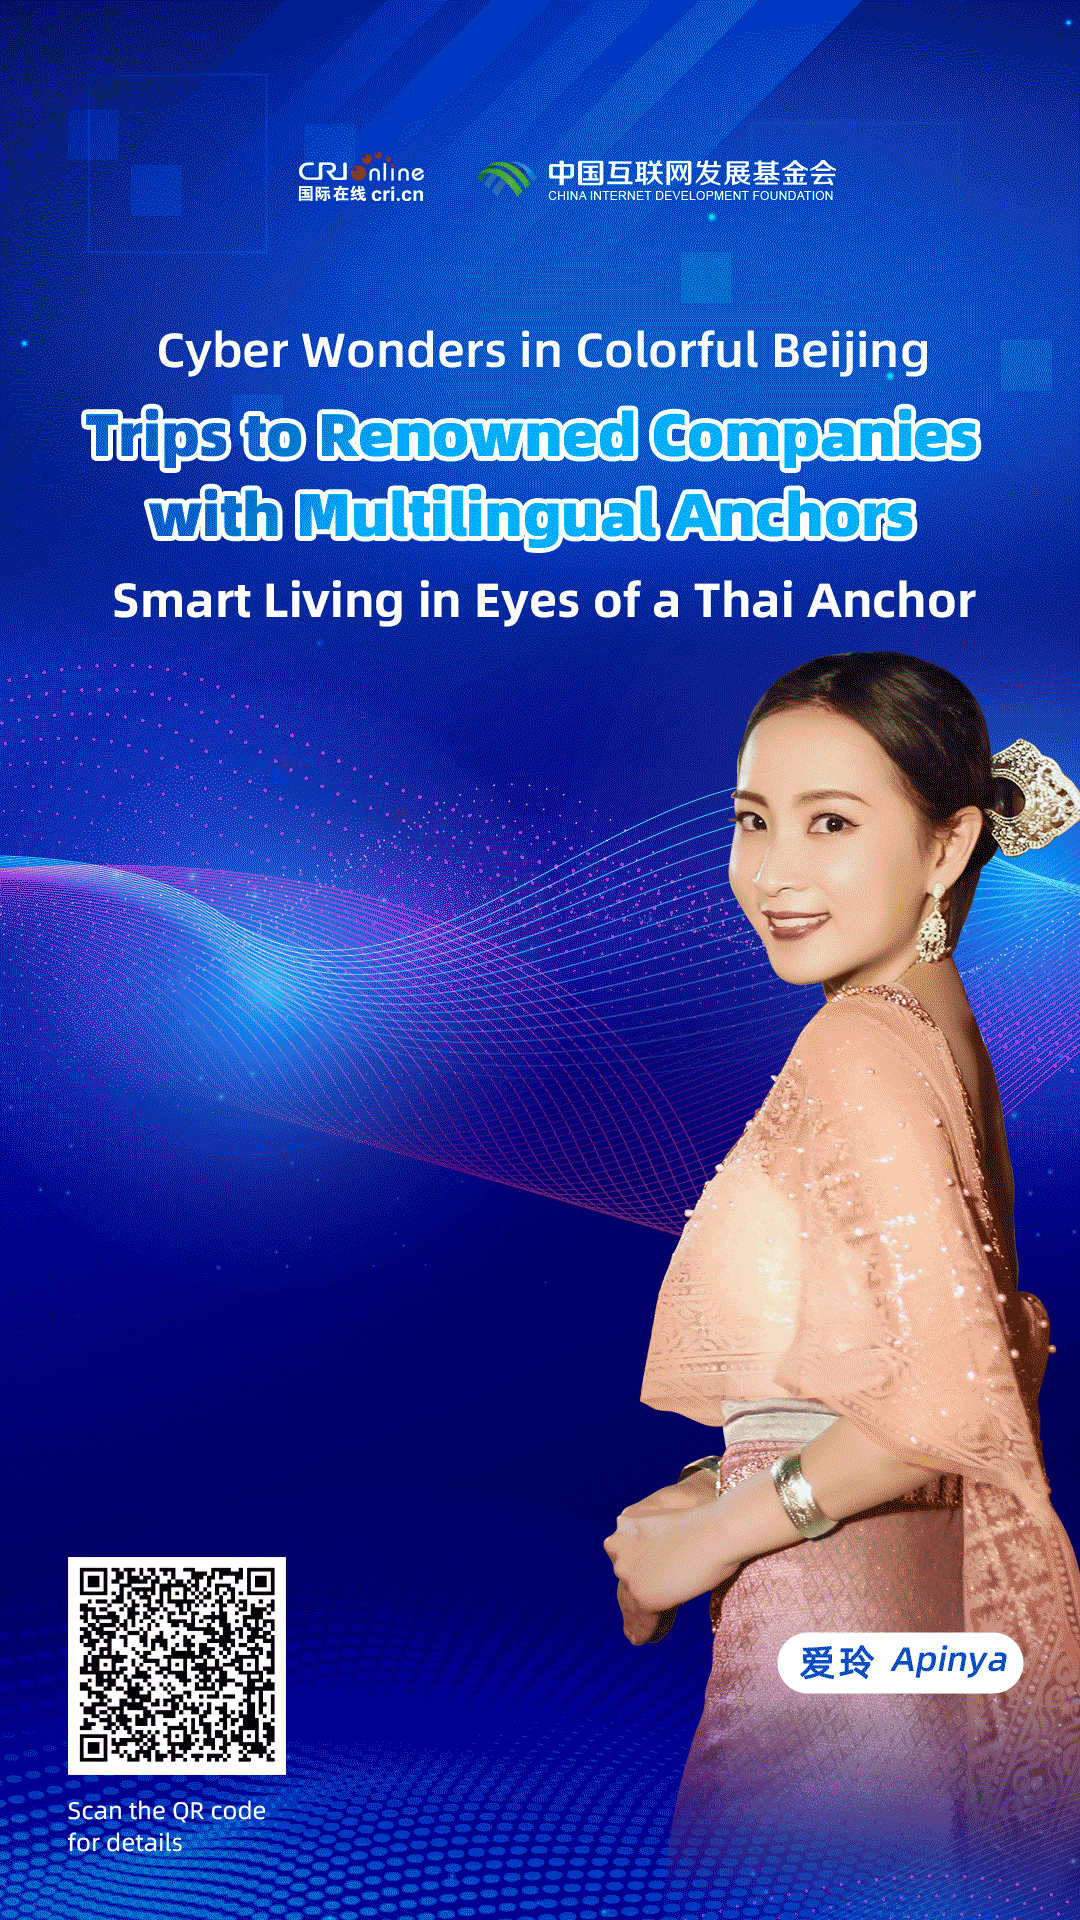 Cyber Wonders in Colorful Beijing - Smart Living in Eyes of a Thai Anchor_fororder_英語-動態海報